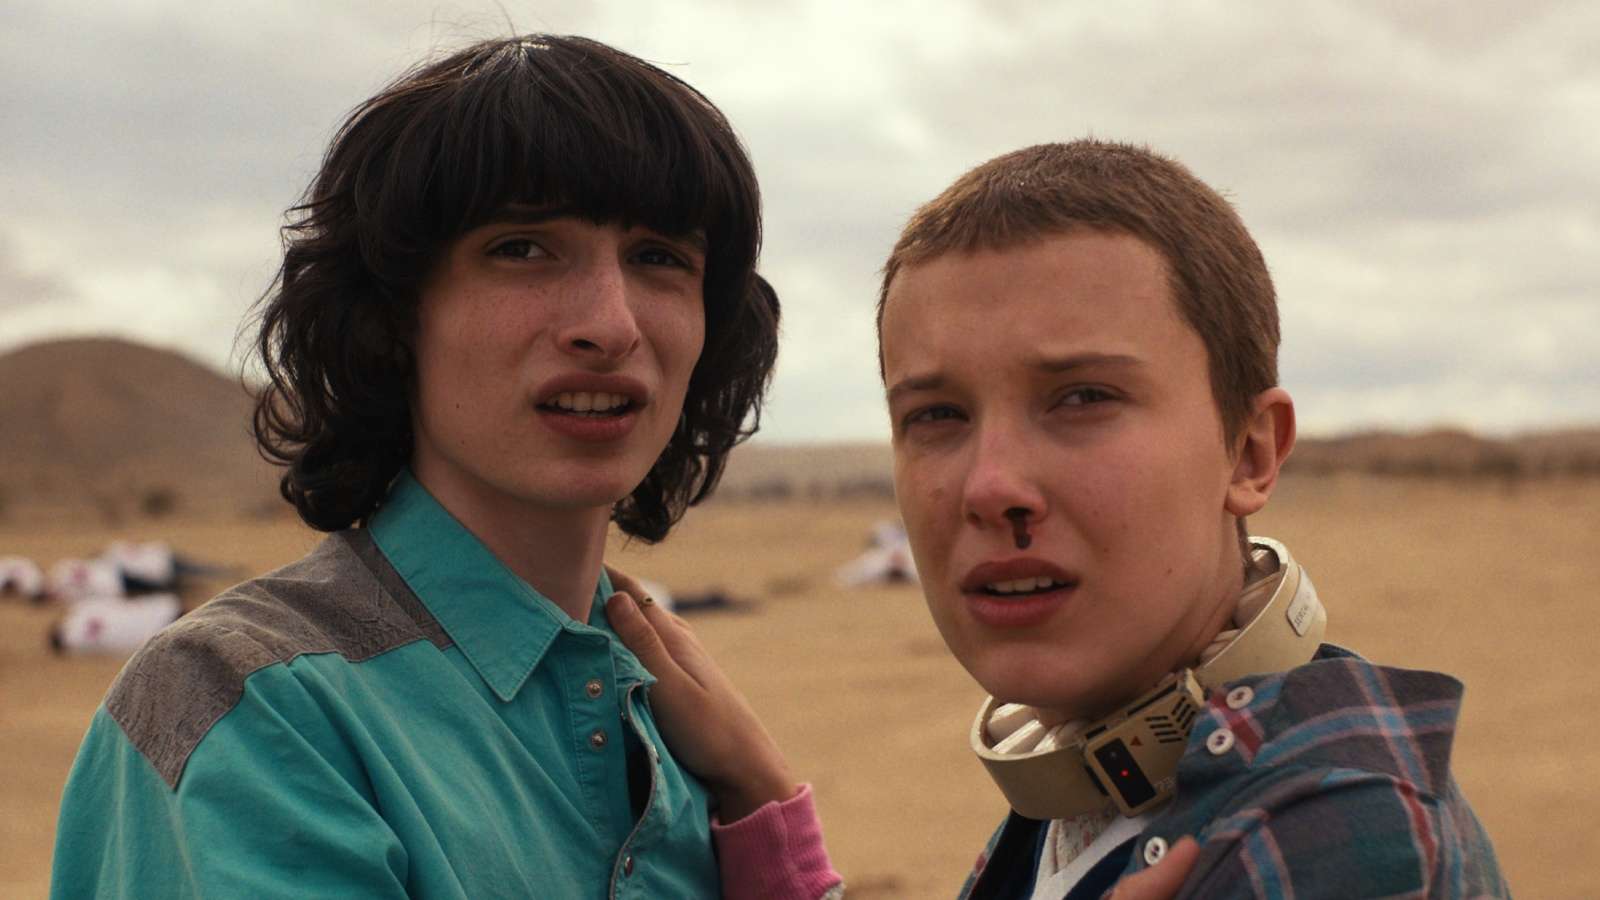 Finn Wolfhard and Millie Bobby Brown in Stranger Things Season 4 as Mike and Eleven